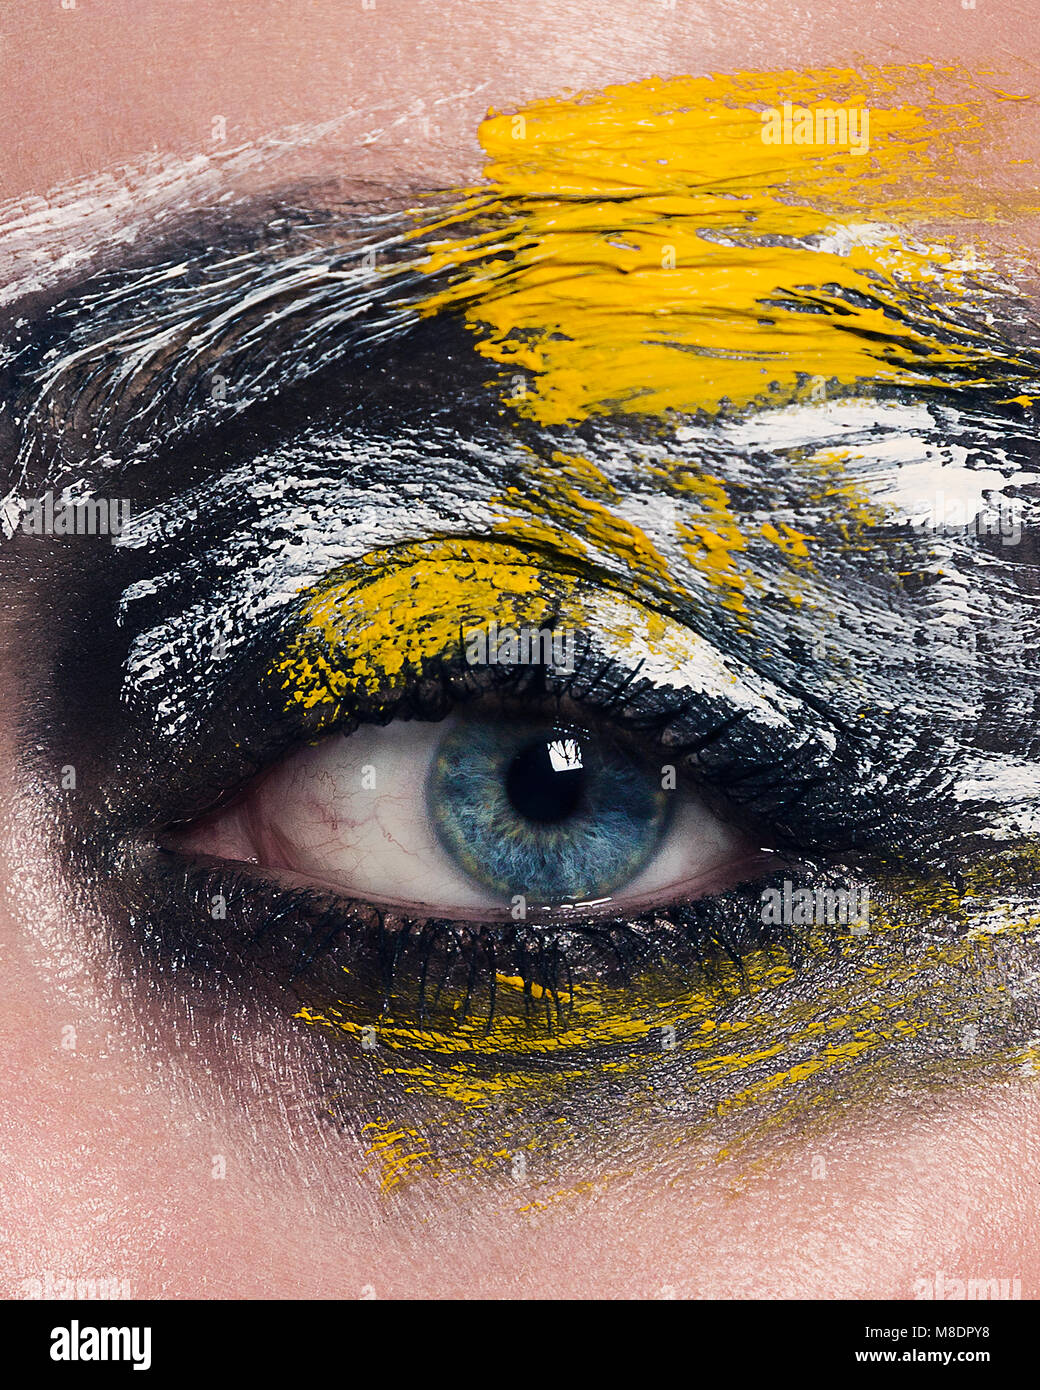 Studio portrait of blue eyed woman with painted face, close up of eye Stock Photo